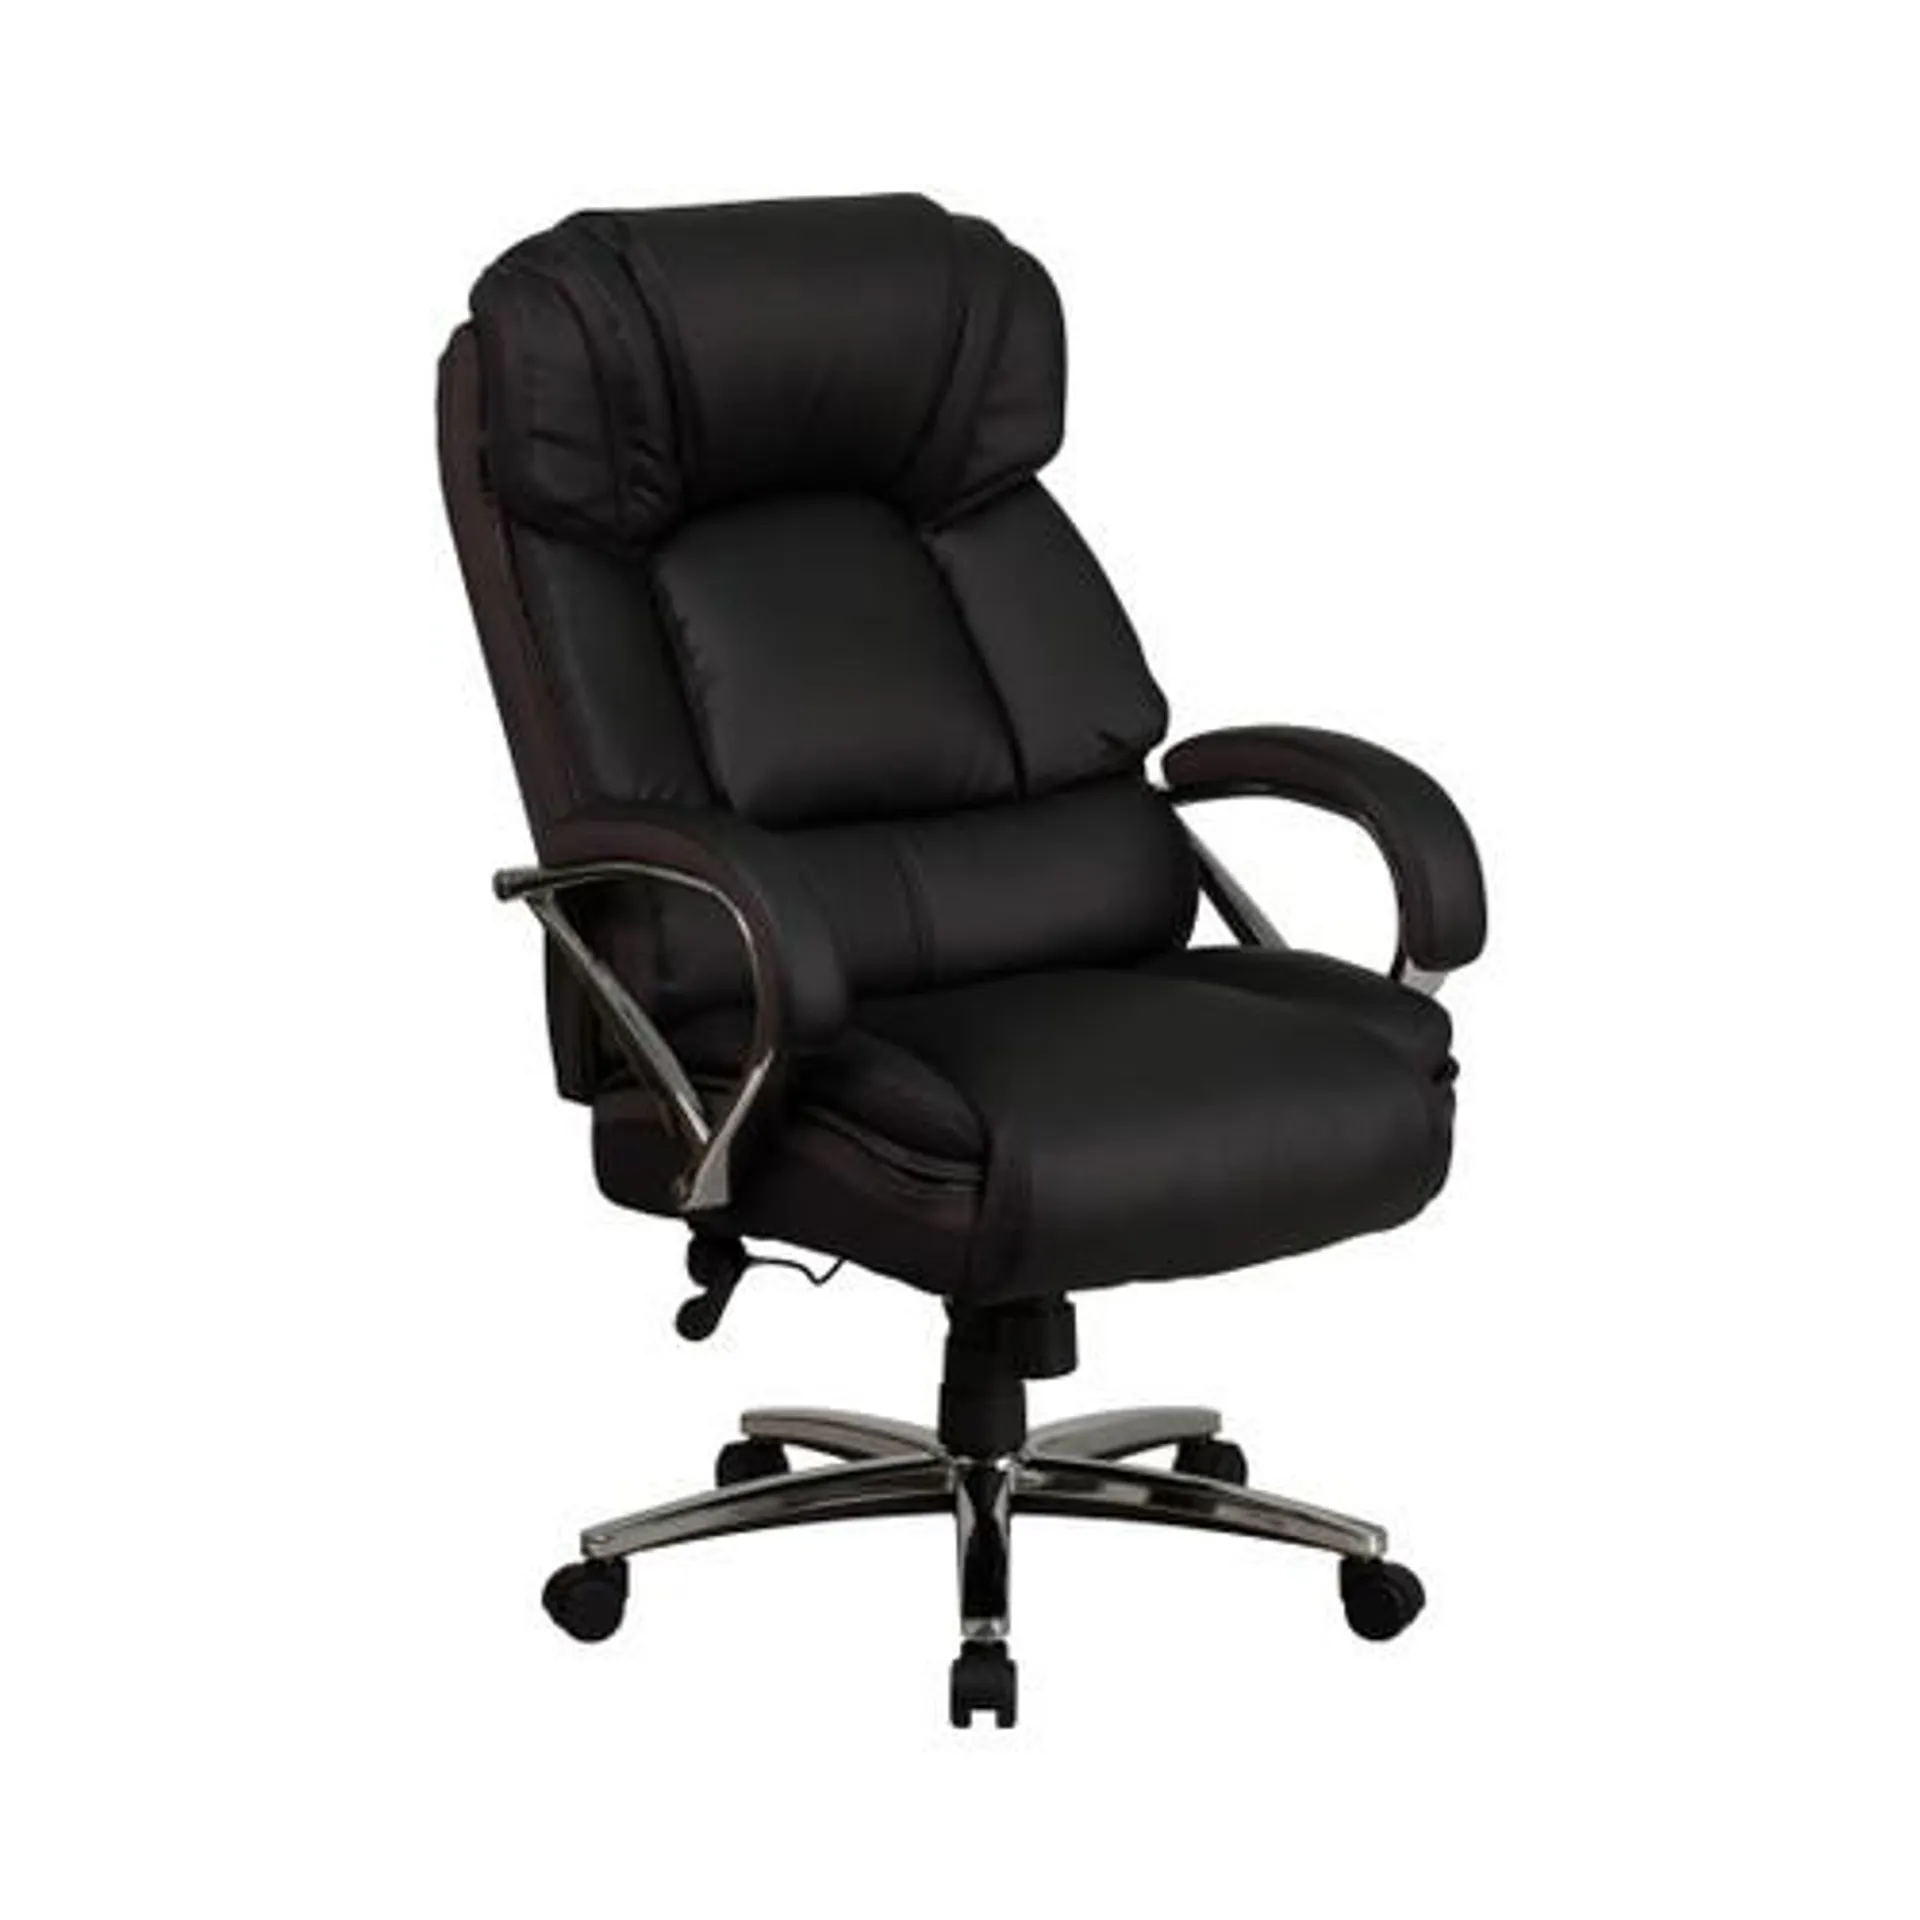 HERCULES Series Big & Tall 500 lb. Rated Black LeatherSoft Executive Swivel Ergonomic Office Chair with Chrome Base and Arms - GO2222GG